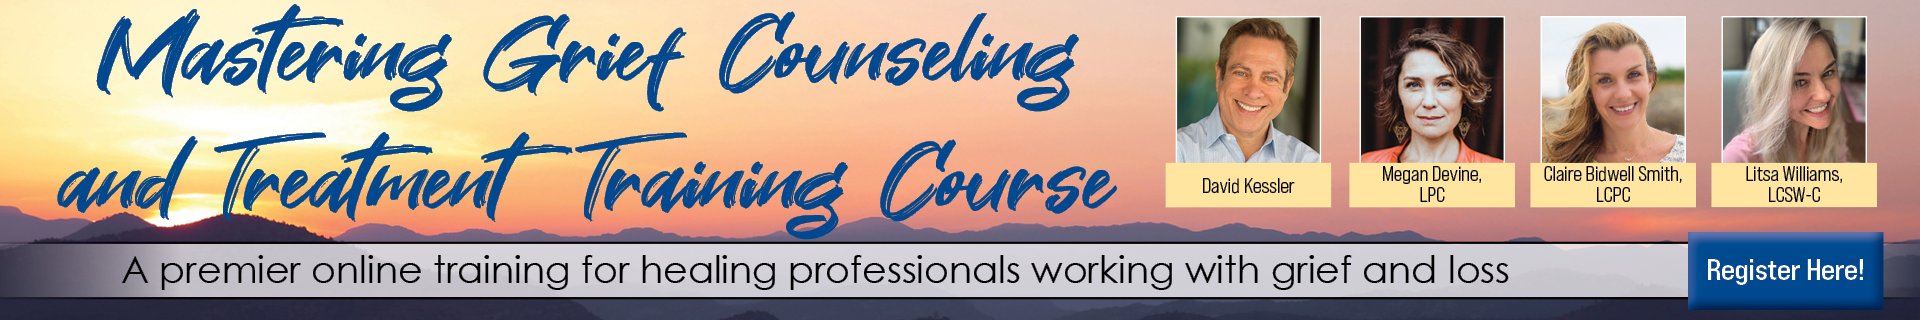 Mastering Grief Counseling and Treatment Training Course